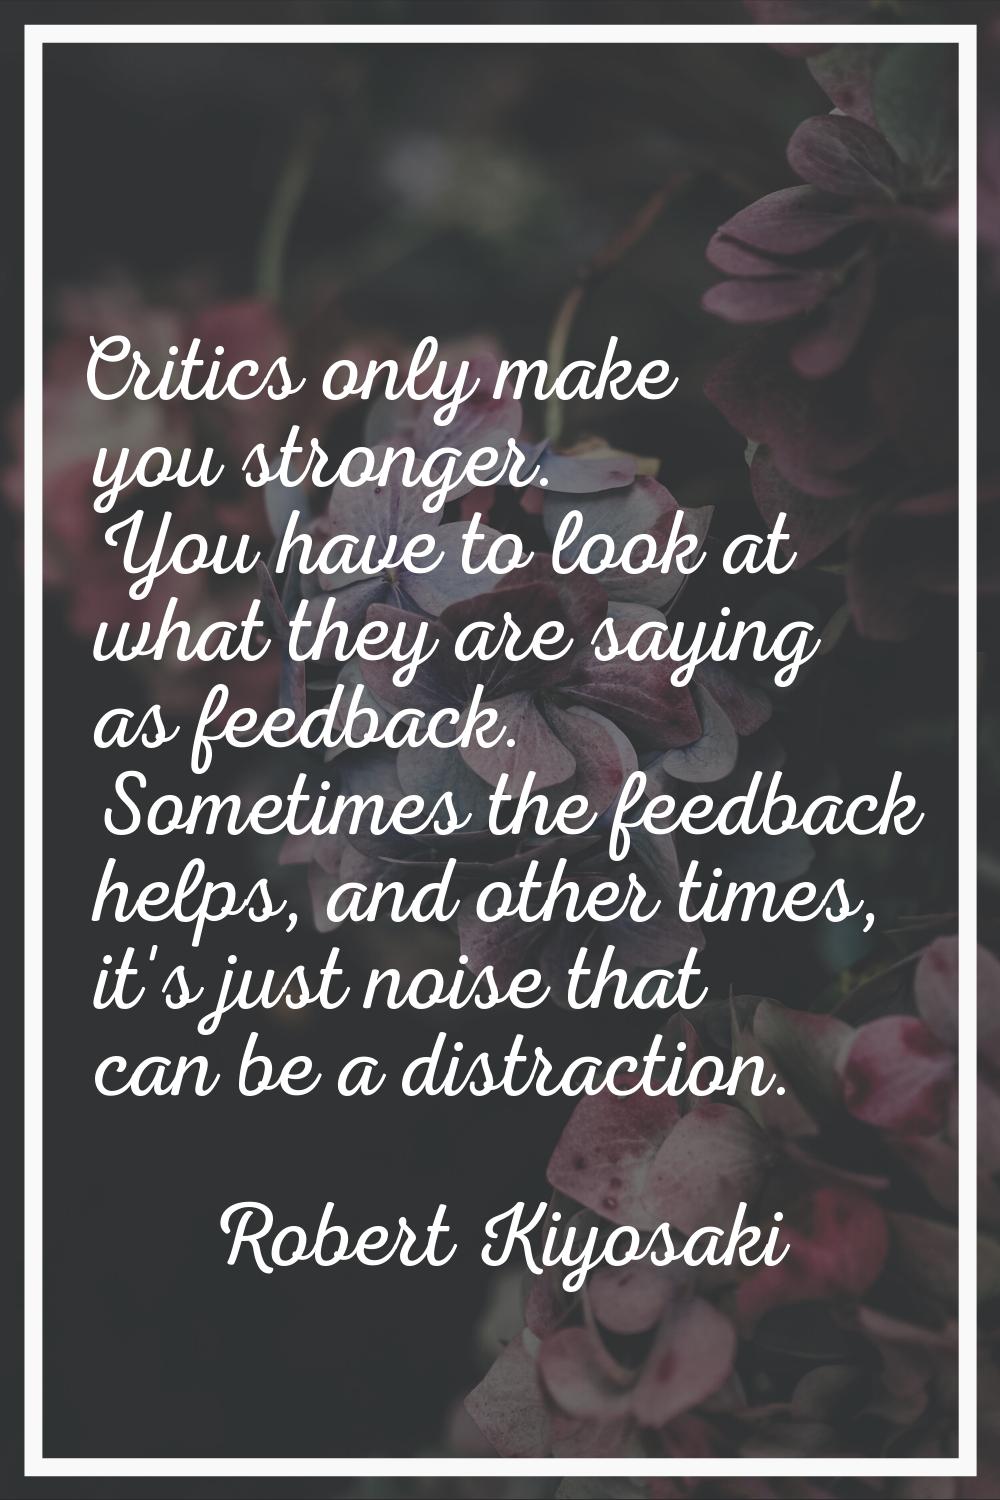 Critics only make you stronger. You have to look at what they are saying as feedback. Sometimes the